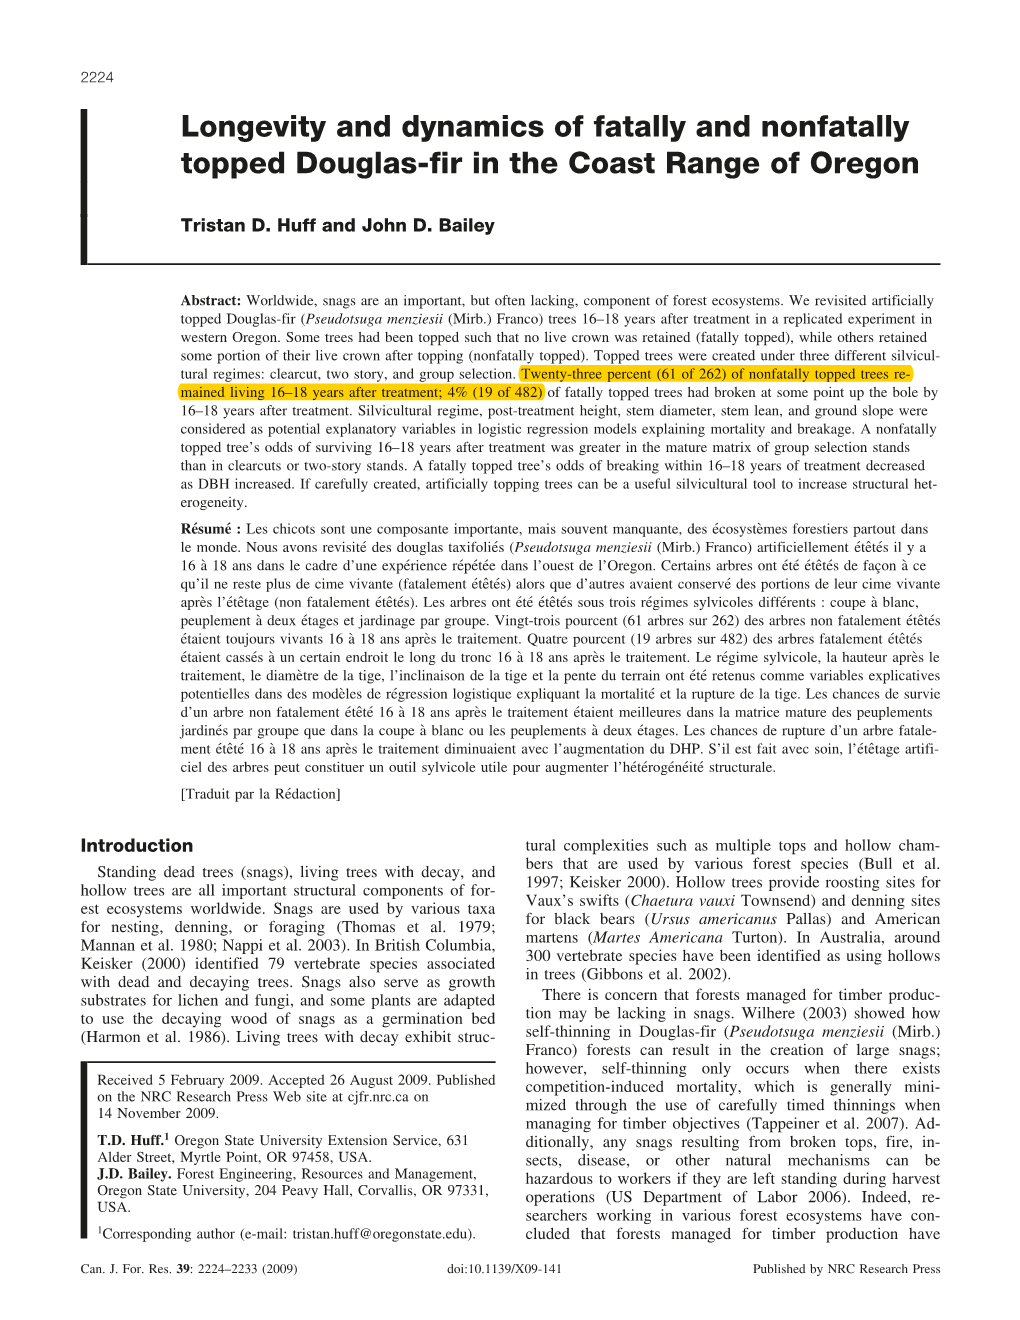 Longevity and Dynamics of Fatally and Nonfatally Topped Douglas-Fir in the Coast Range of Oregon